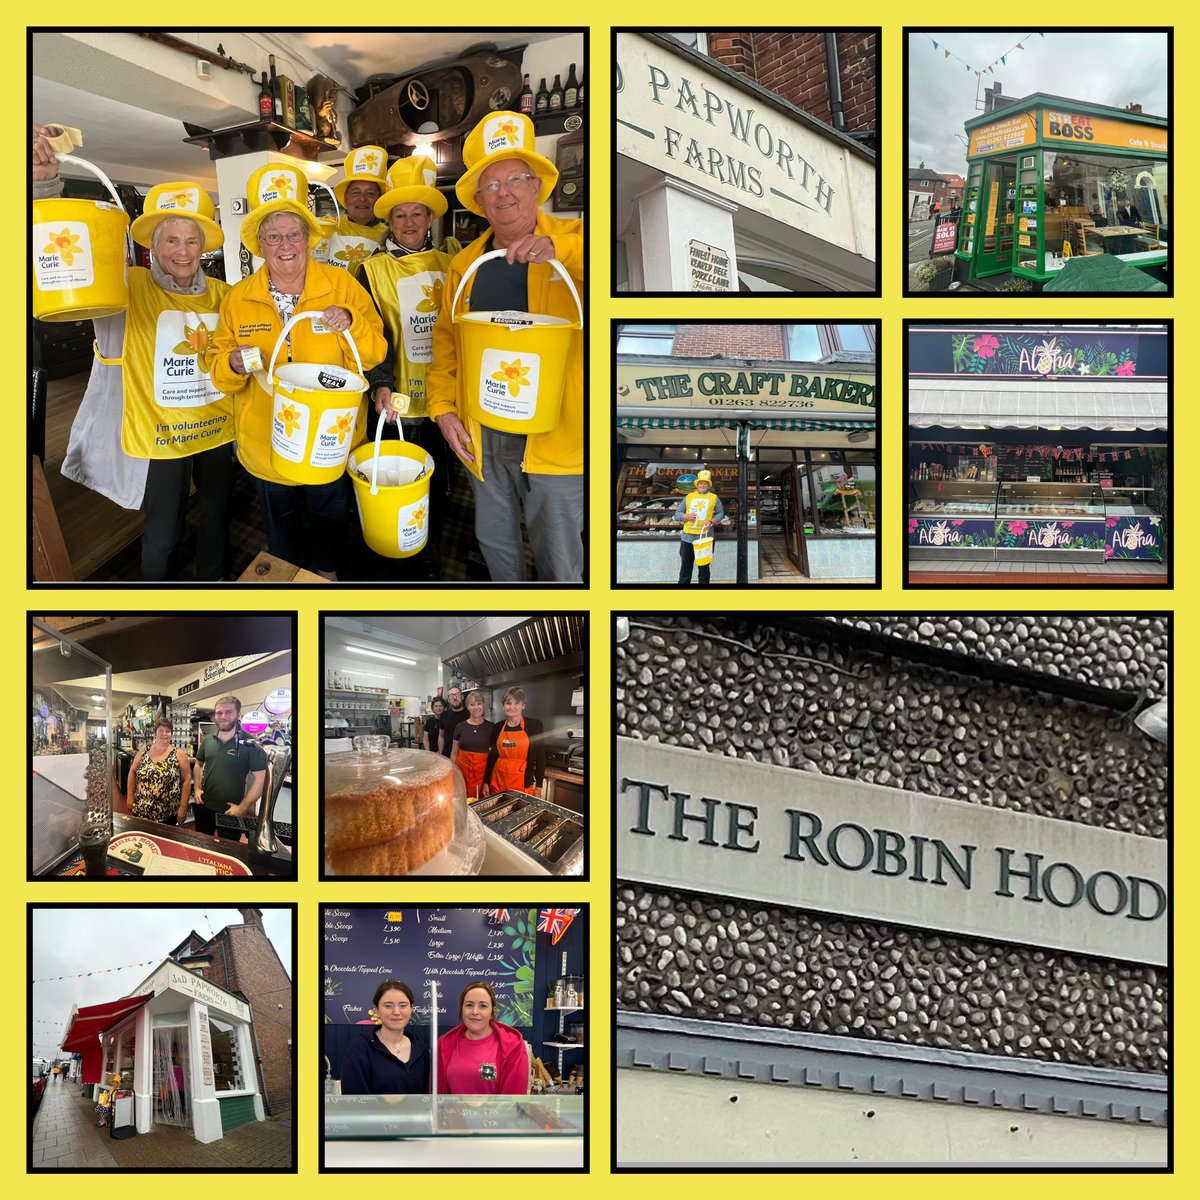 Massive thanks to these businesses for their support today at our @mariecurieuk street collection in #Sheringham #NorthNorfolk #TheRobinHoodPub, #StreatBoss Cafe, @papworthfarms #CraftBakery #AlohaIces. You provided a base, donations, warm drinks & protection from the rain! TY 🙏